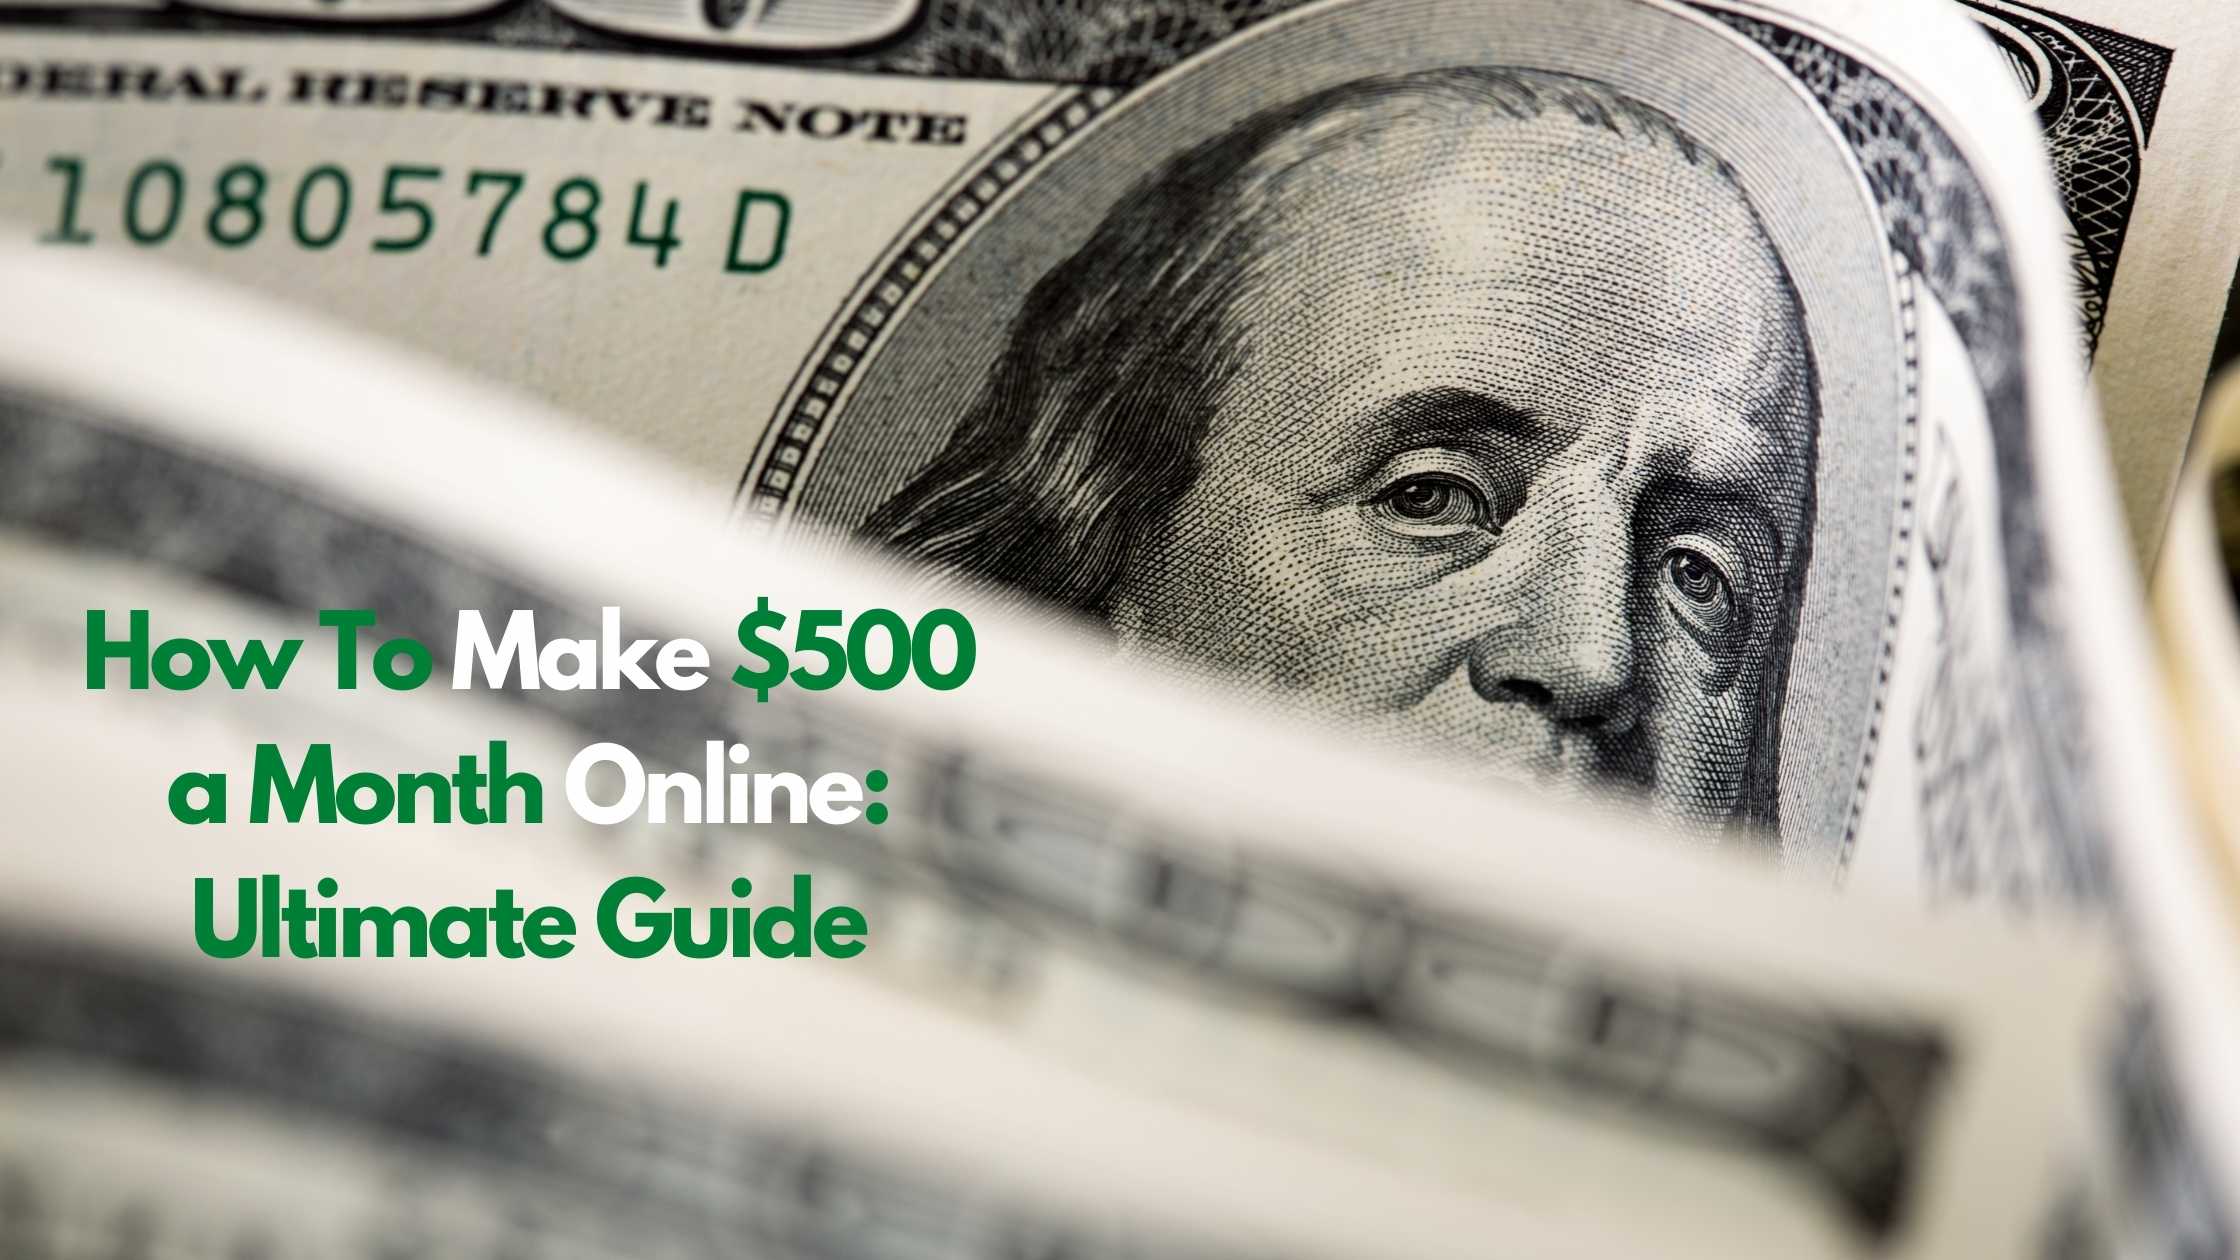 How To Make $500 a Month Online Ultimate Guide